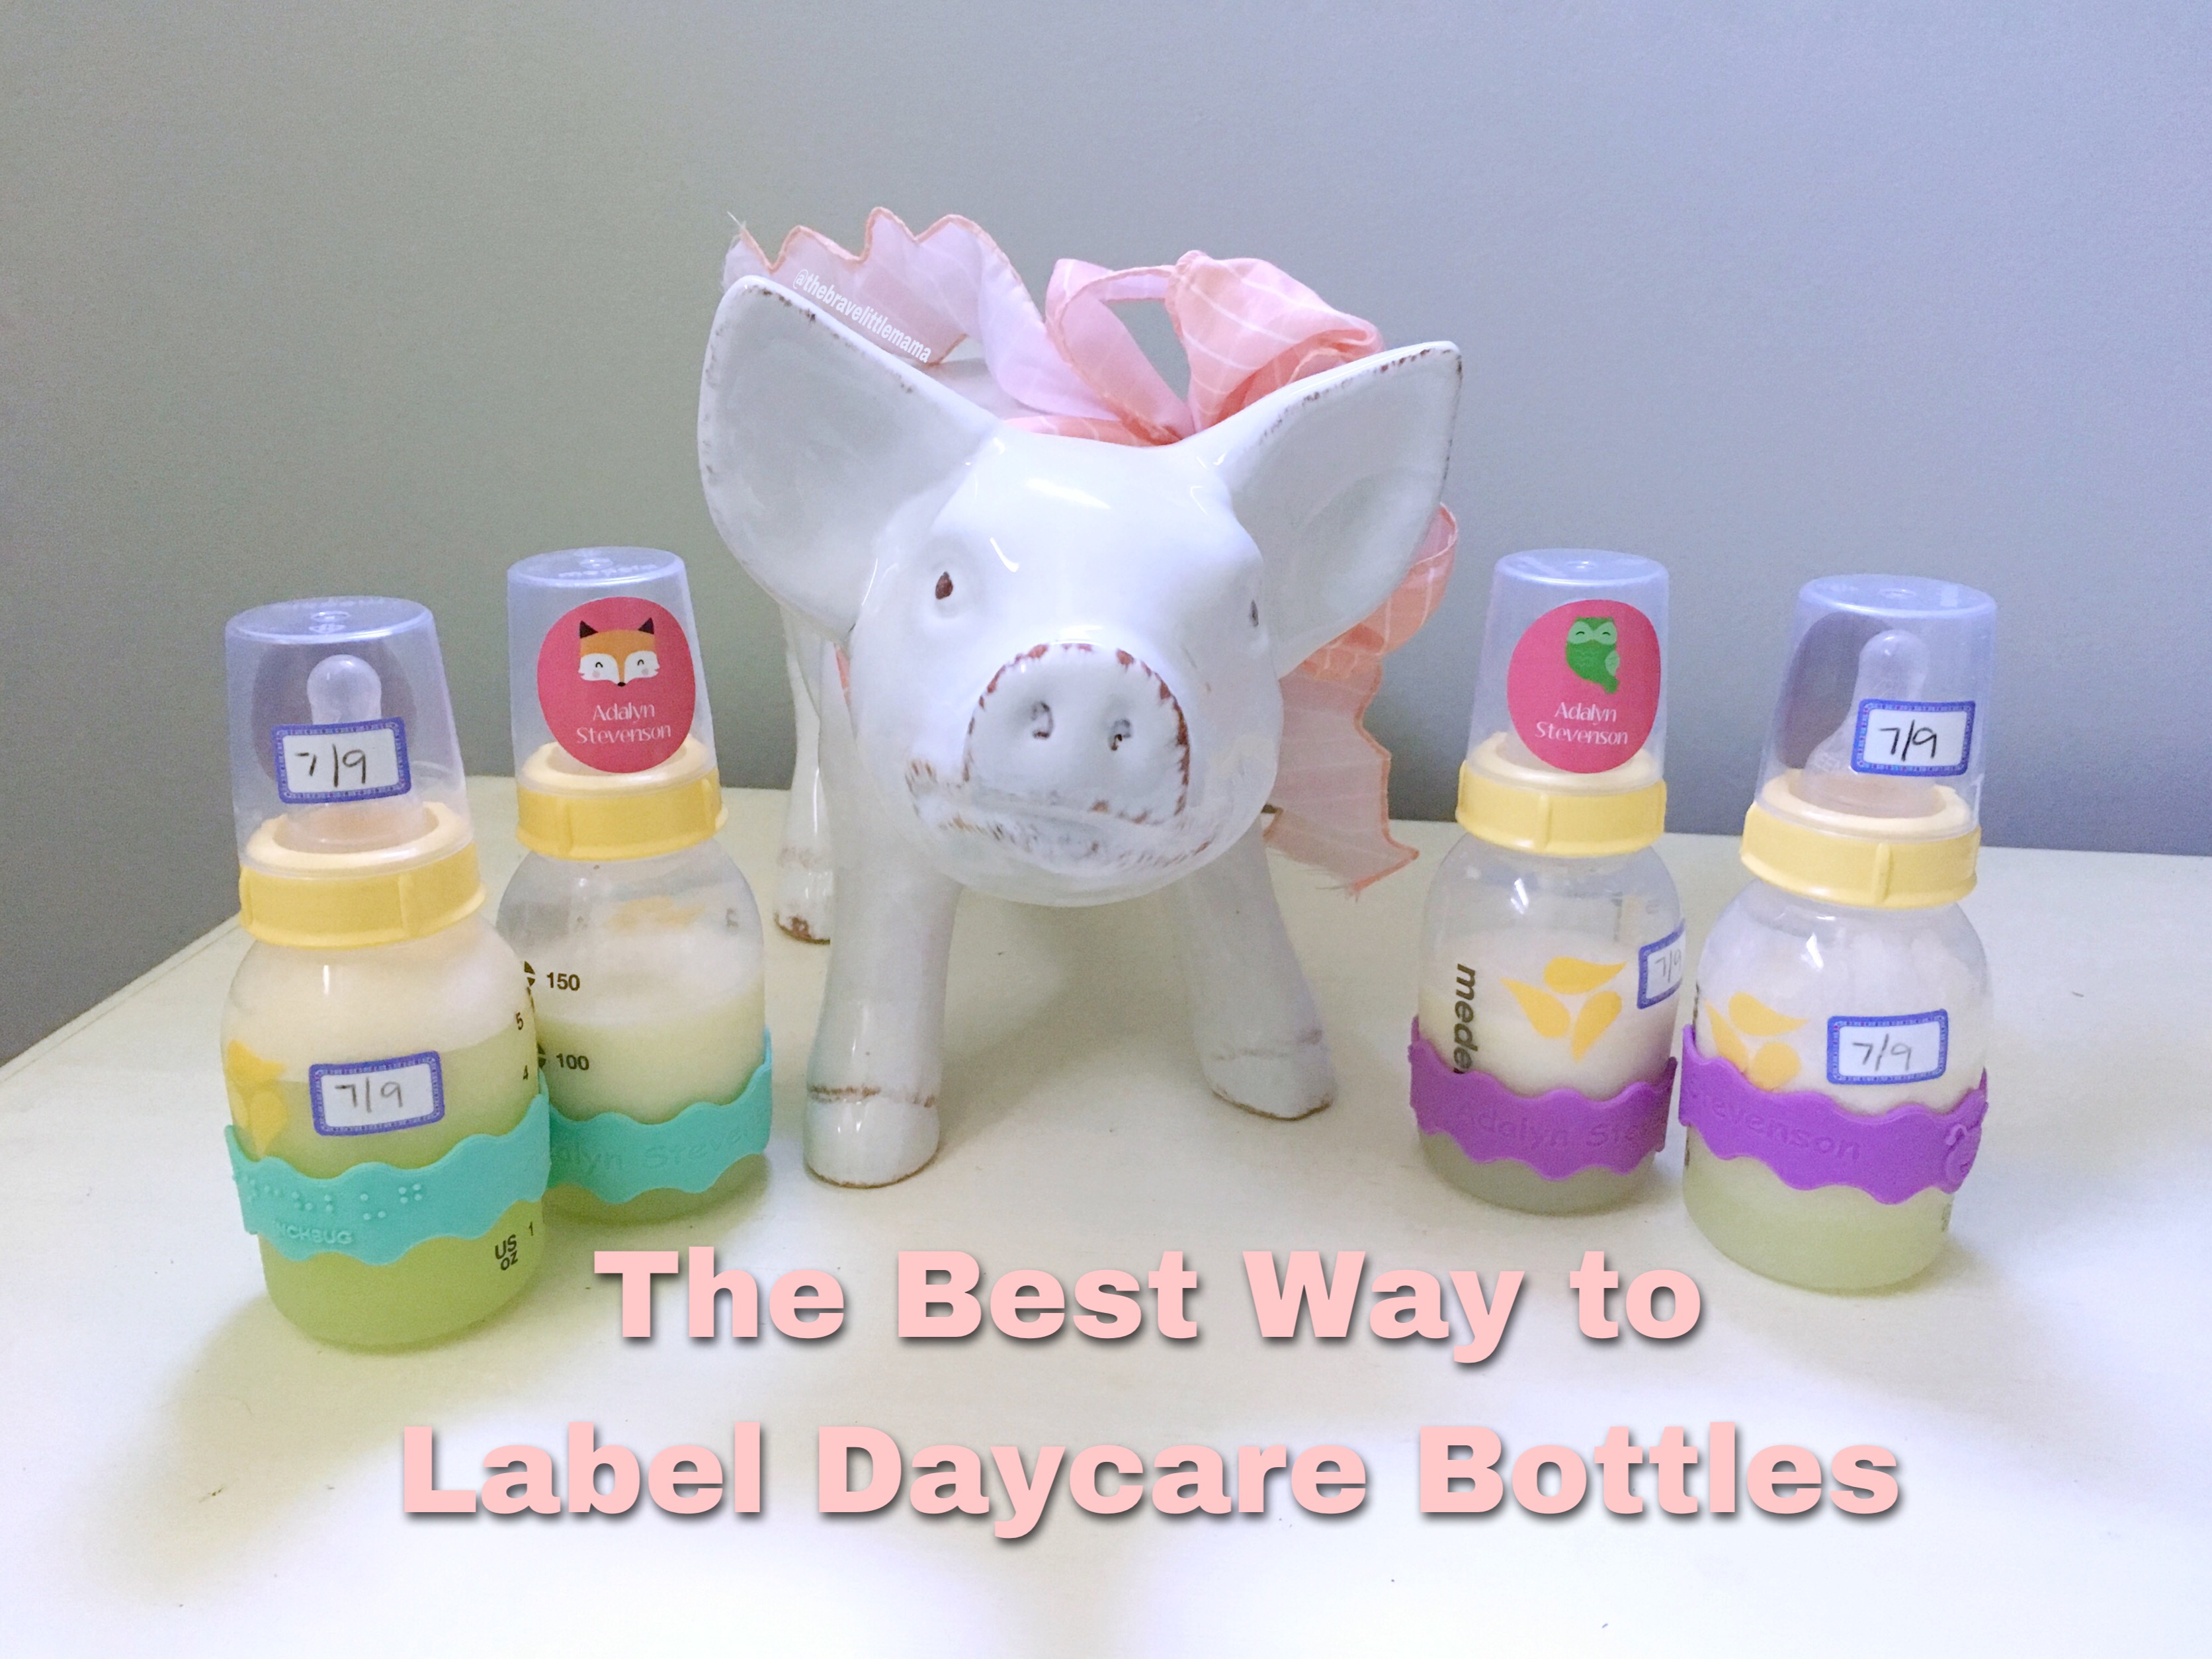 The Best Way to Label Daycare Bottles